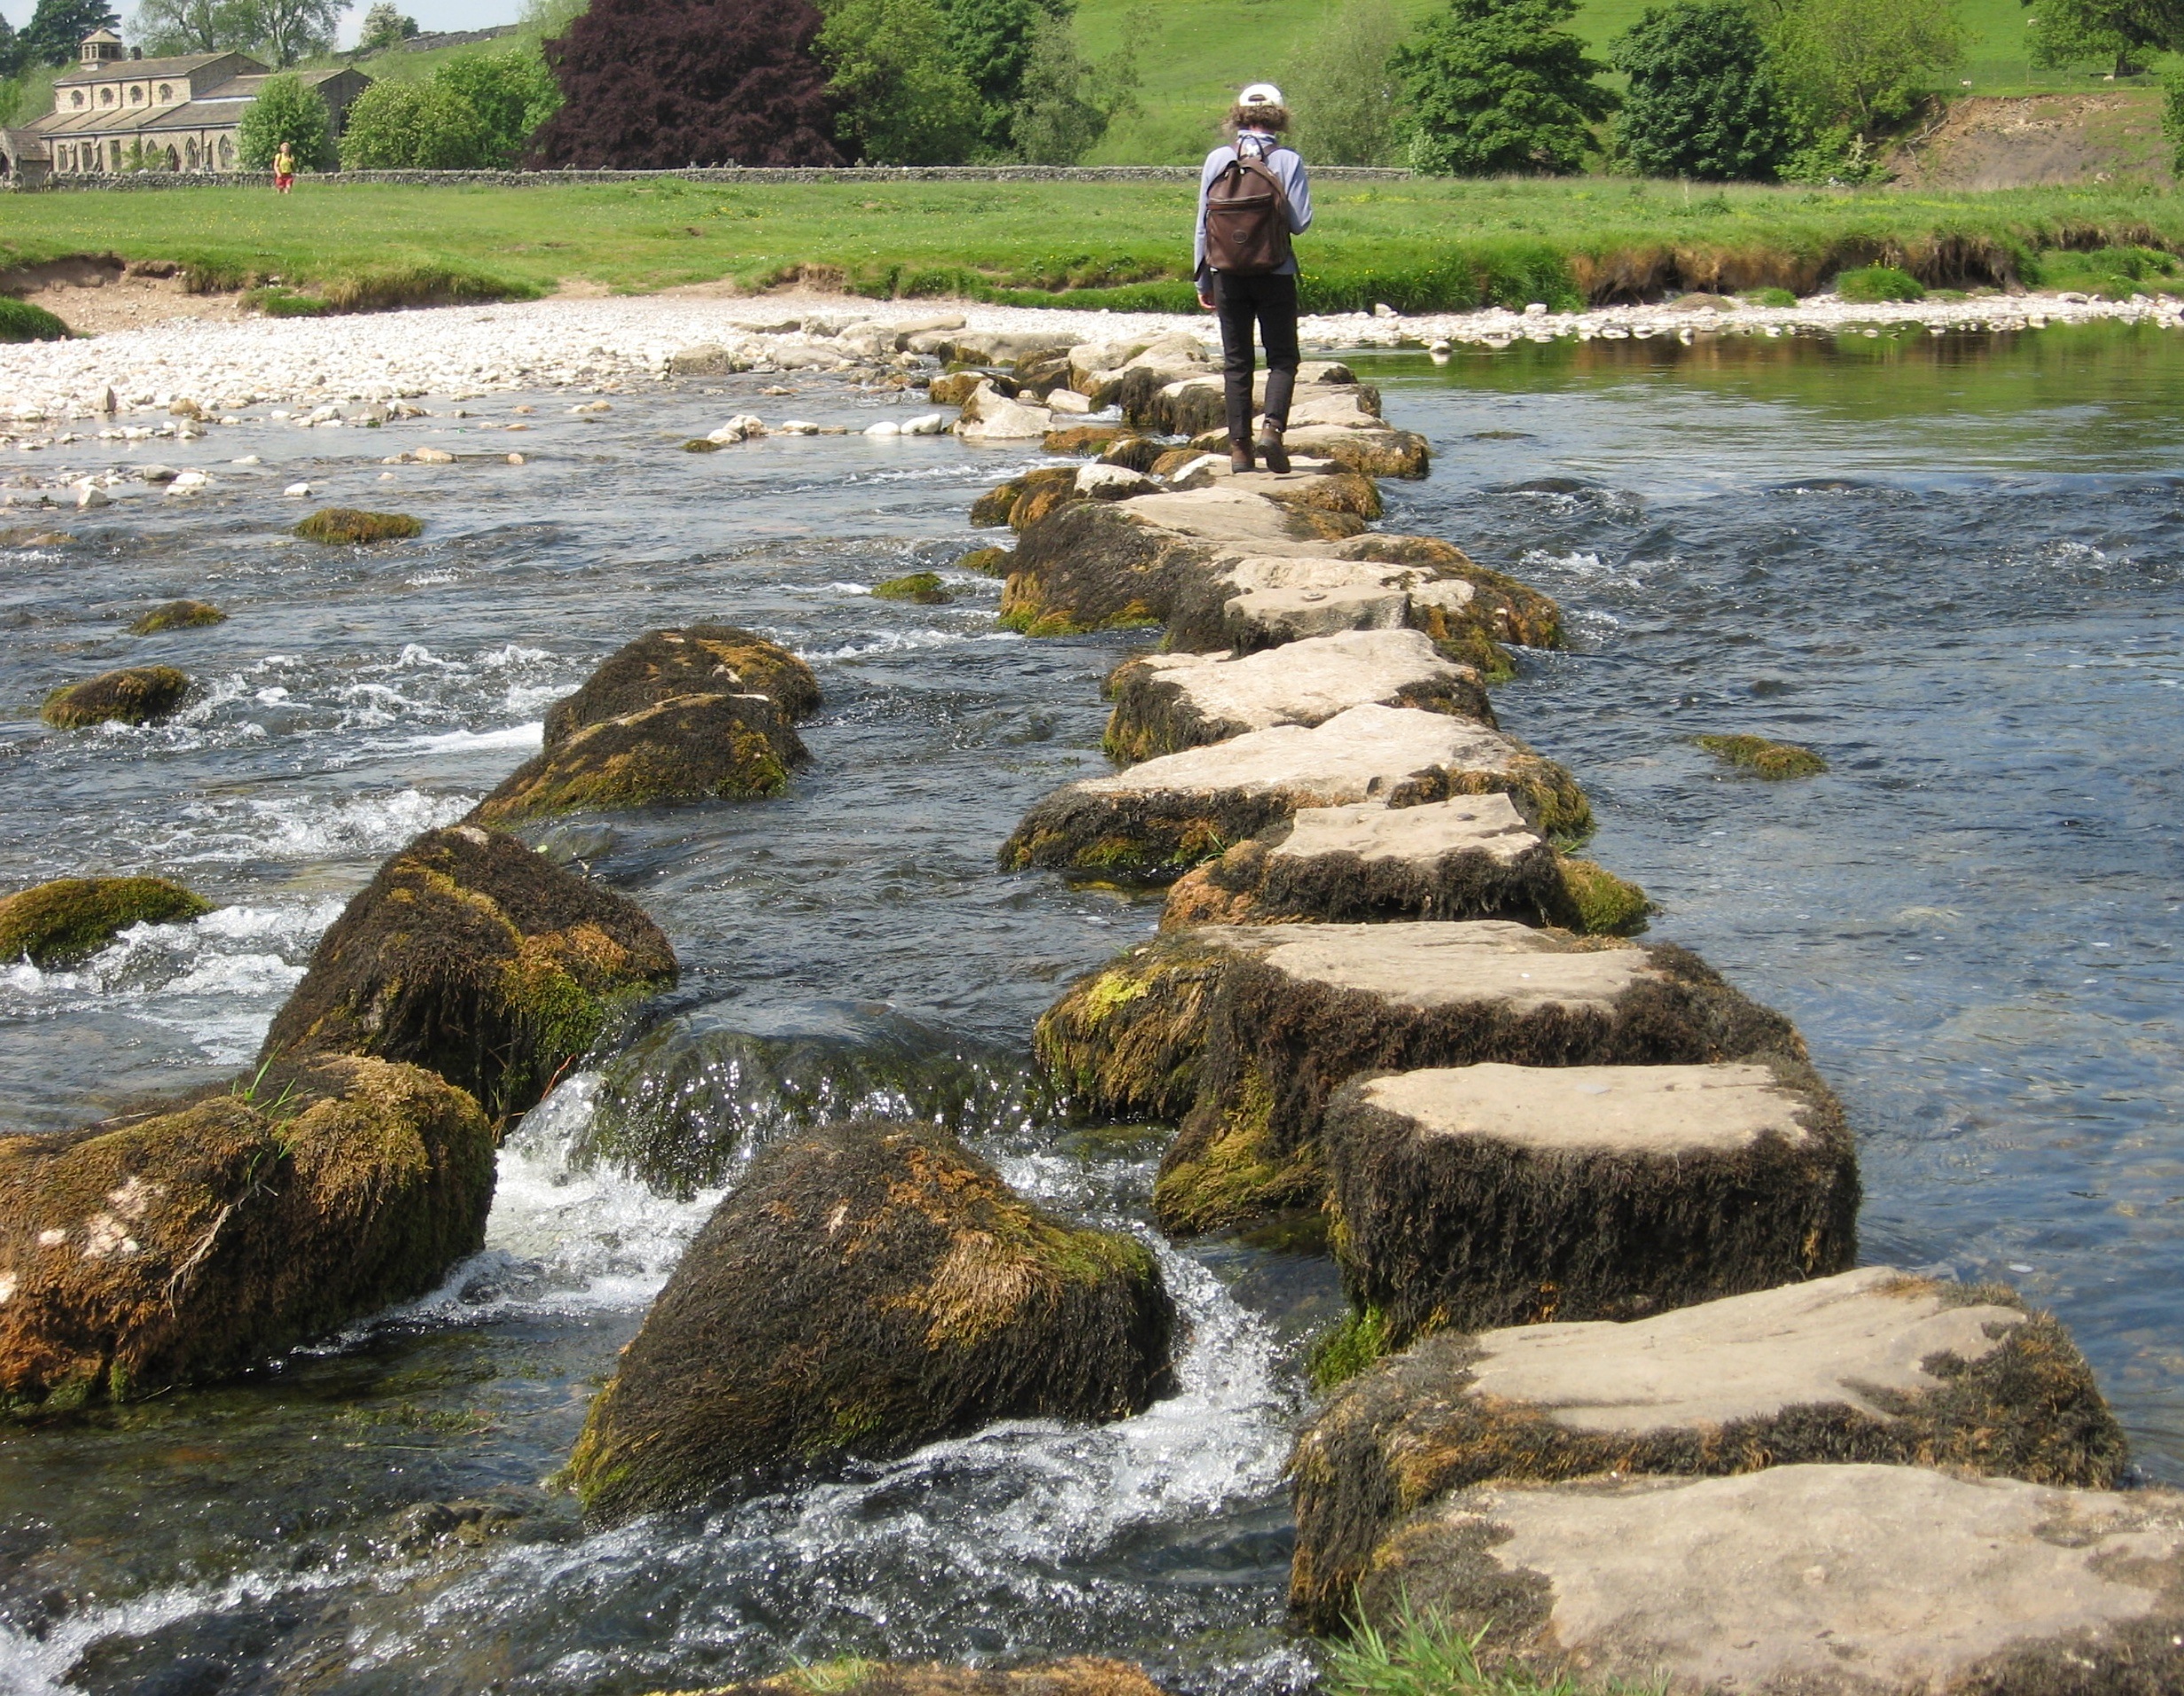 File:Stepping stones 3.jpg - Wikimedia Commons